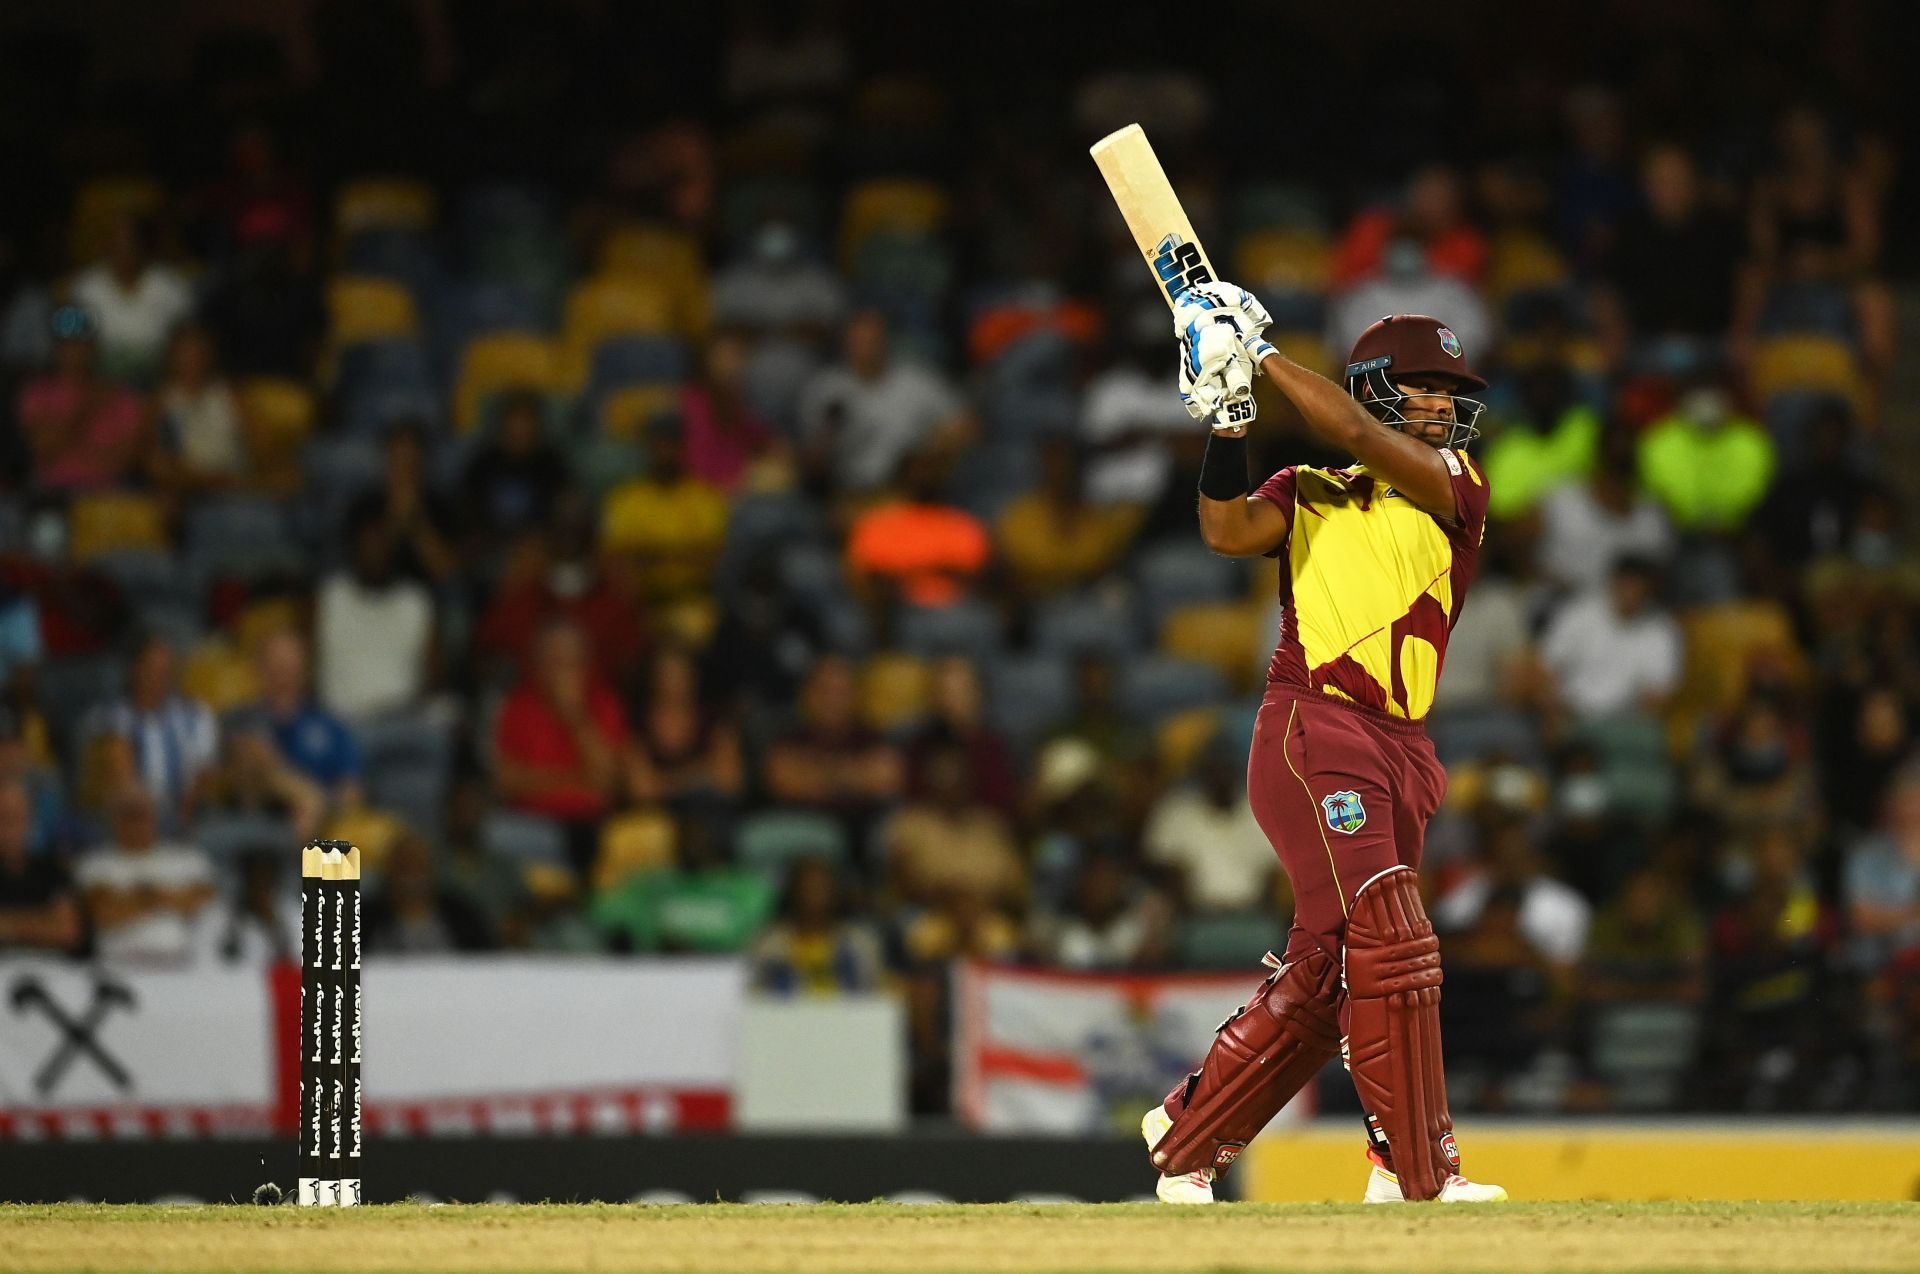 Nicholas Pooran is the leading run-scorer in the competition.